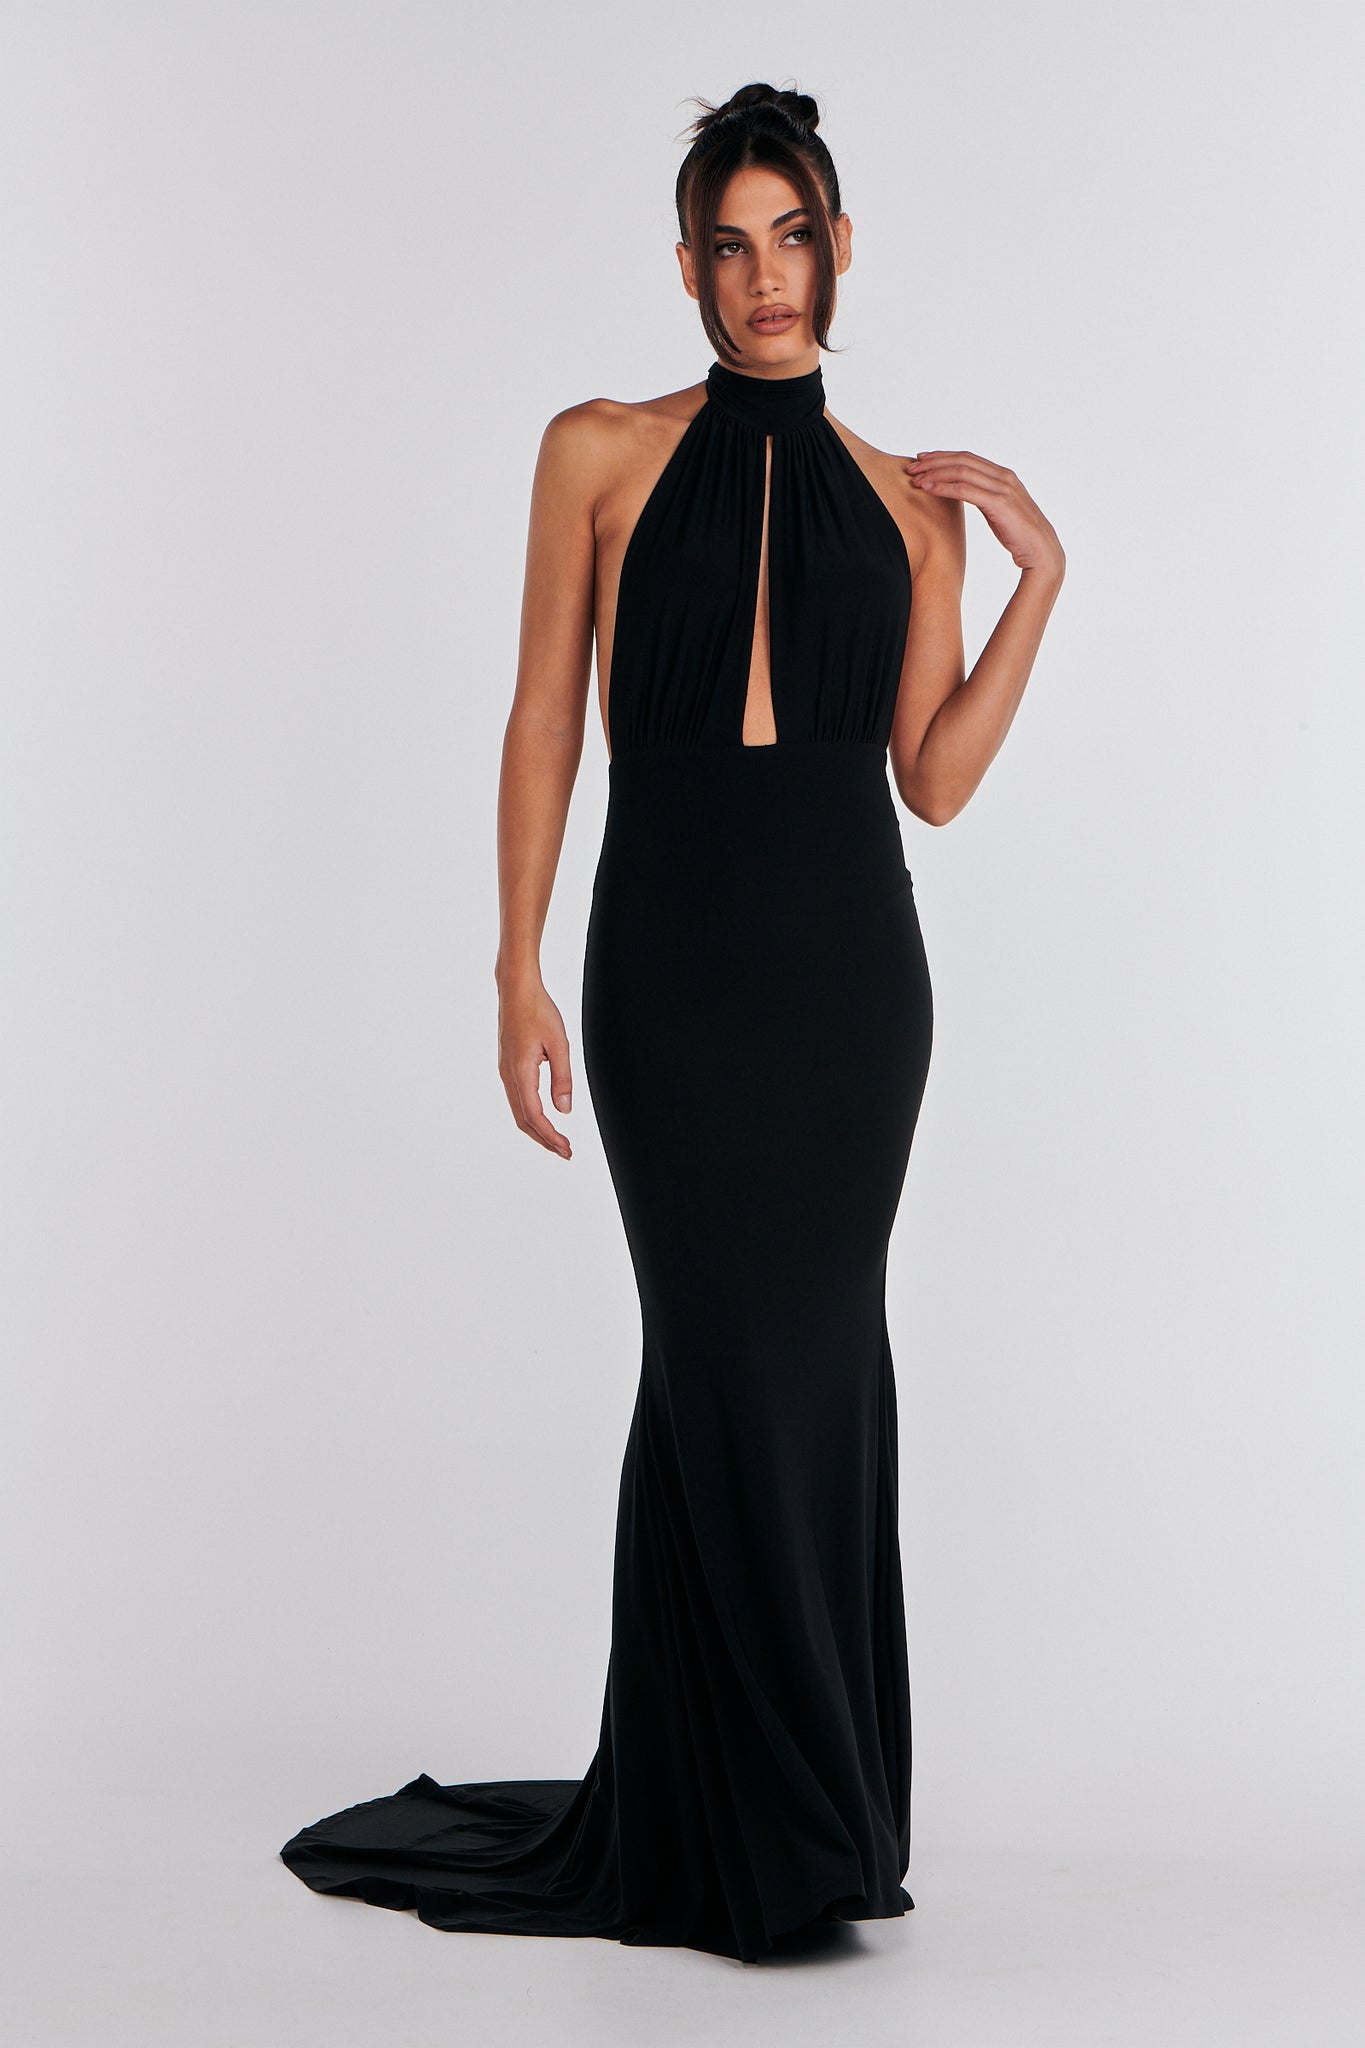 MÉLANI The Label LUCIA Black Keyhole Neckline Backless Bridesmaid Formal Gown